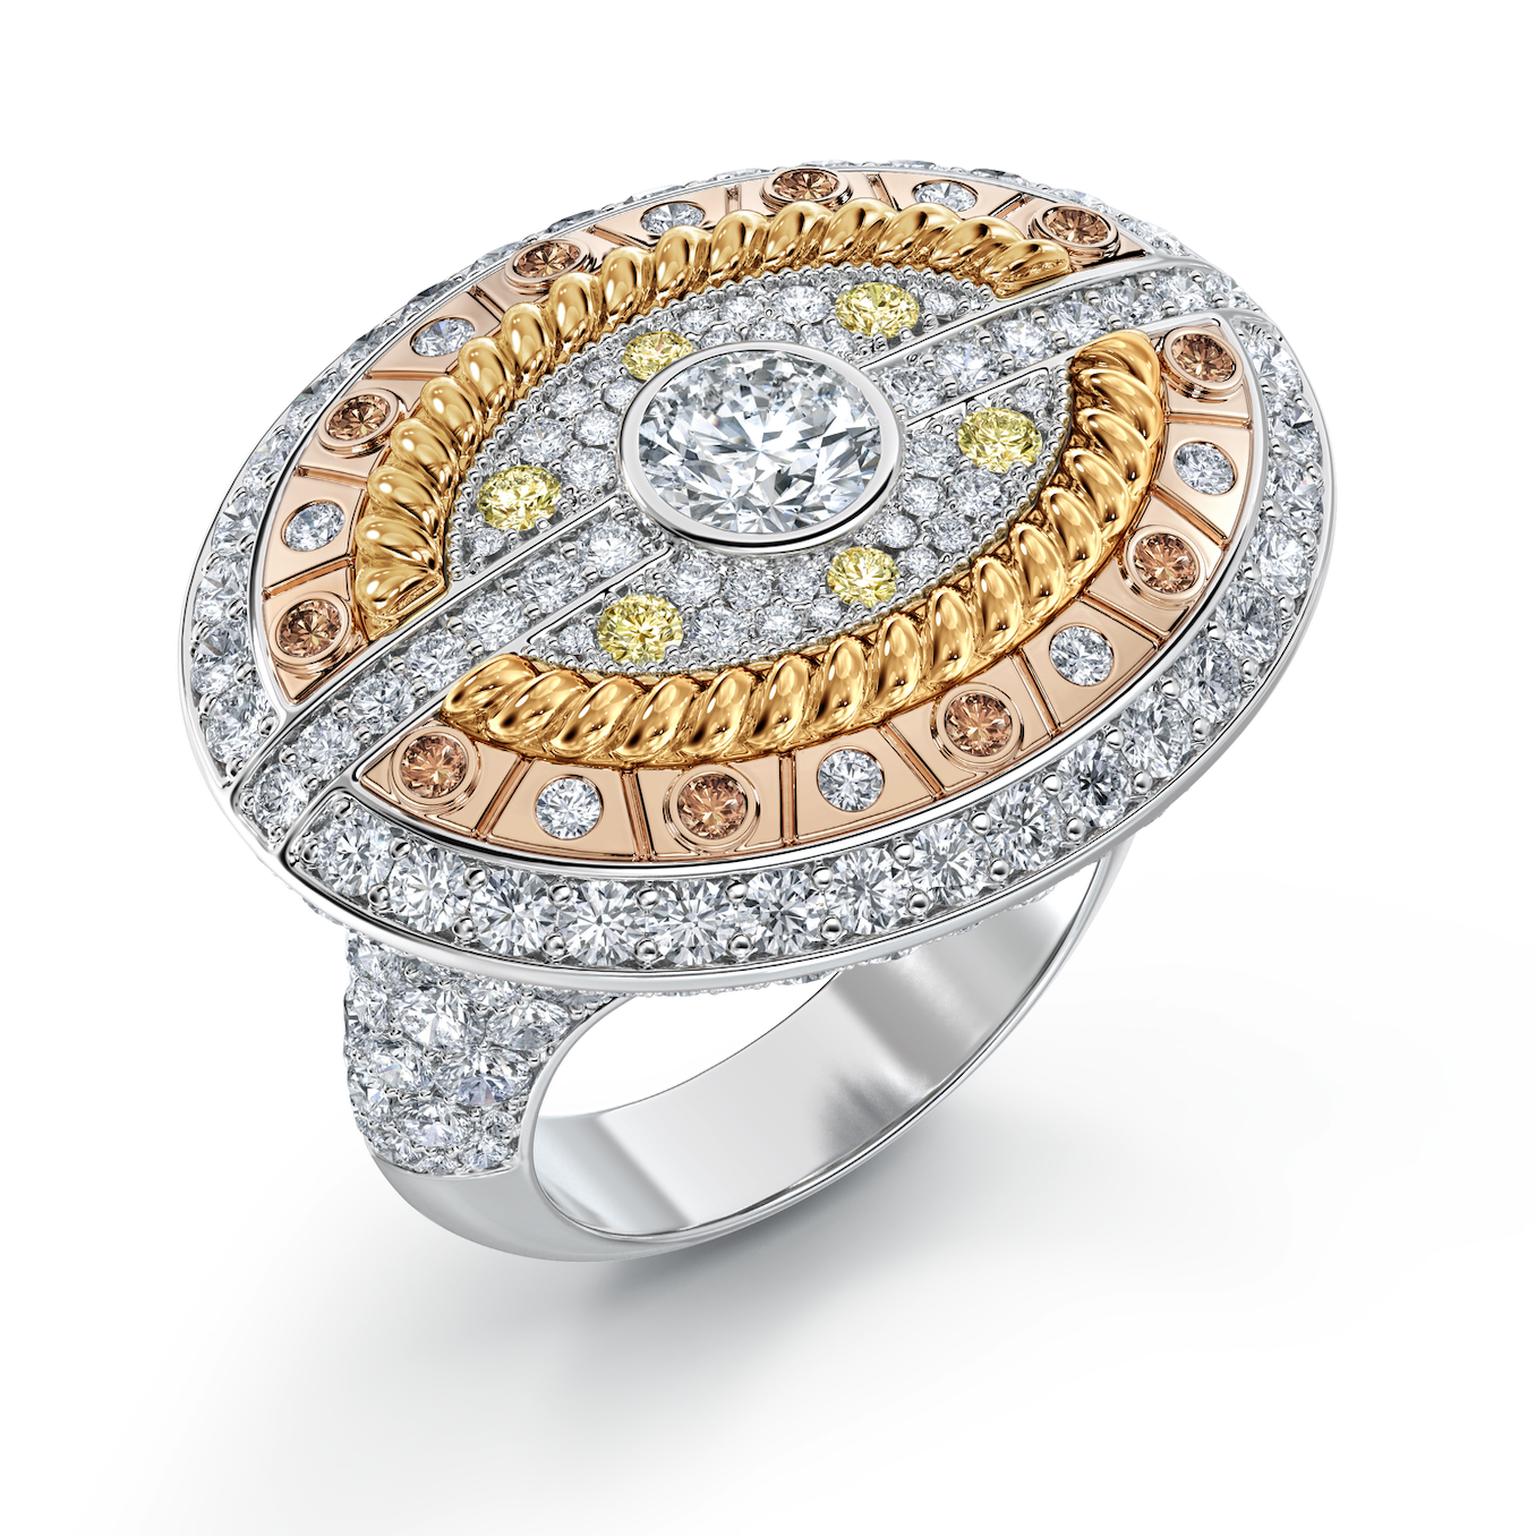 De Beers inspires with Talisman Four Seasons - The Jewelry Magazine